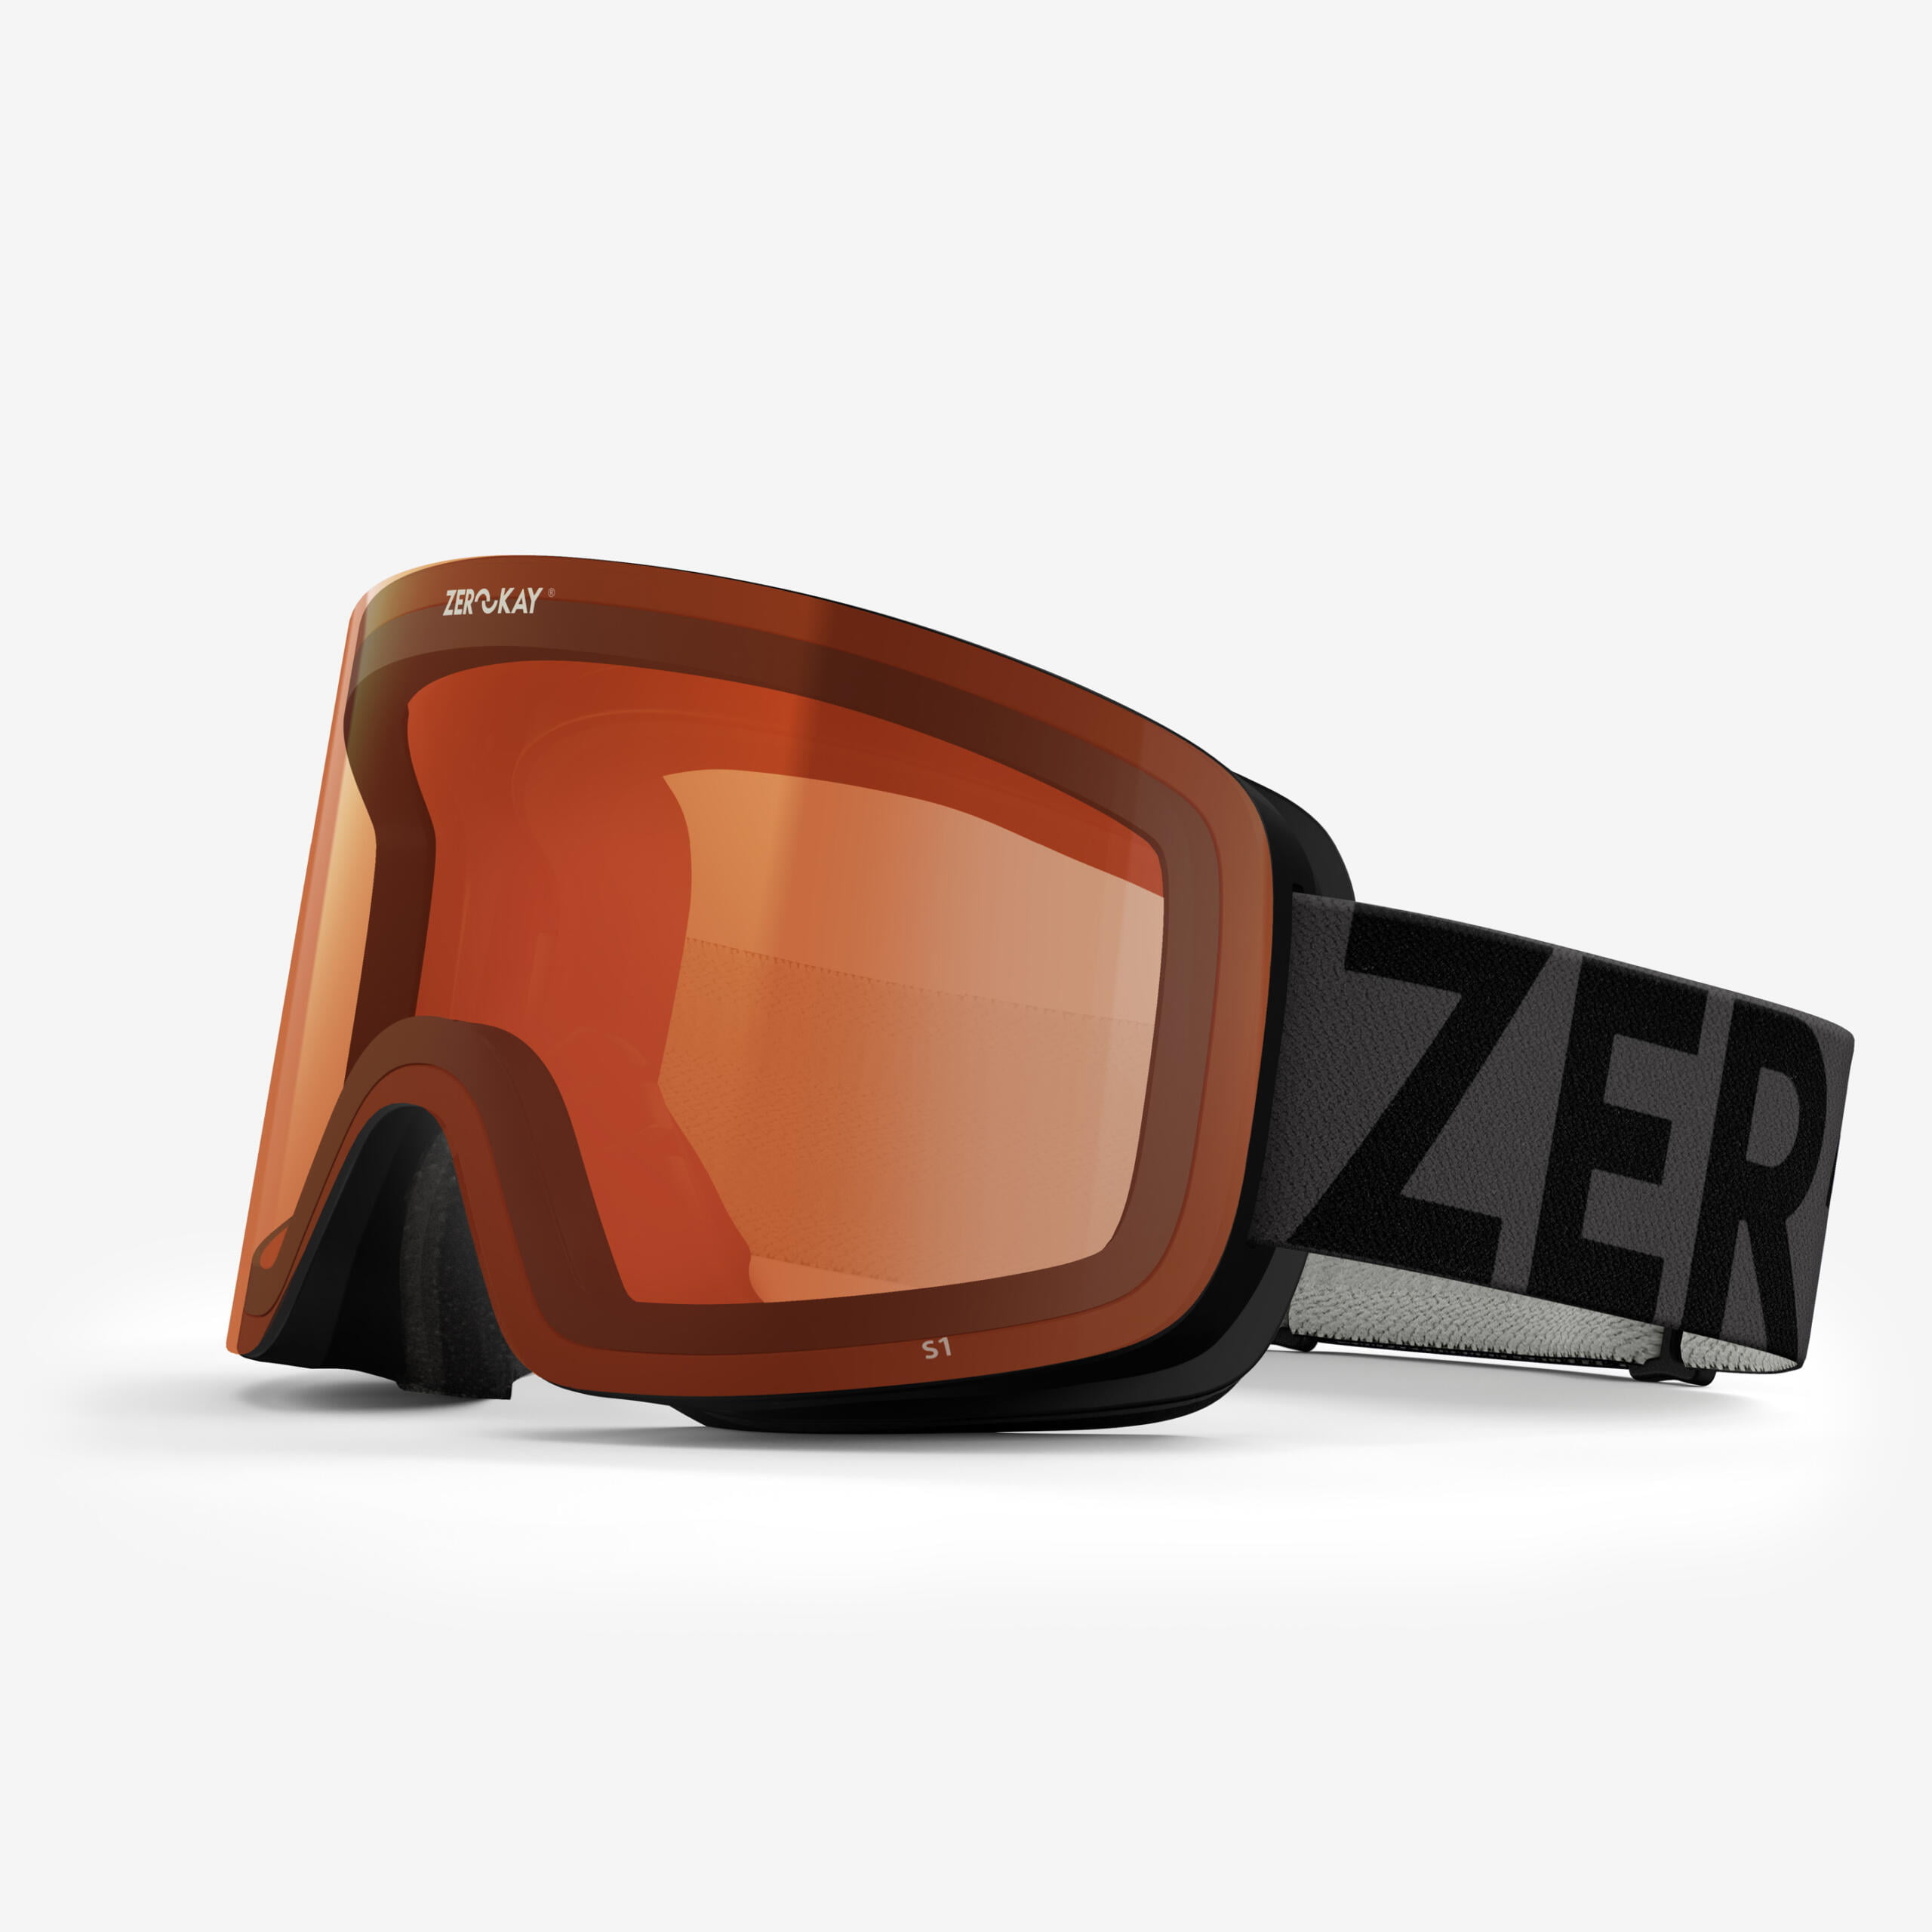 Icon Ski Goggles with magnetic orange lenses, anti-fog treatment, and 3-layer foam, offering S1 protection and ideal comfort in low visibility conditions.